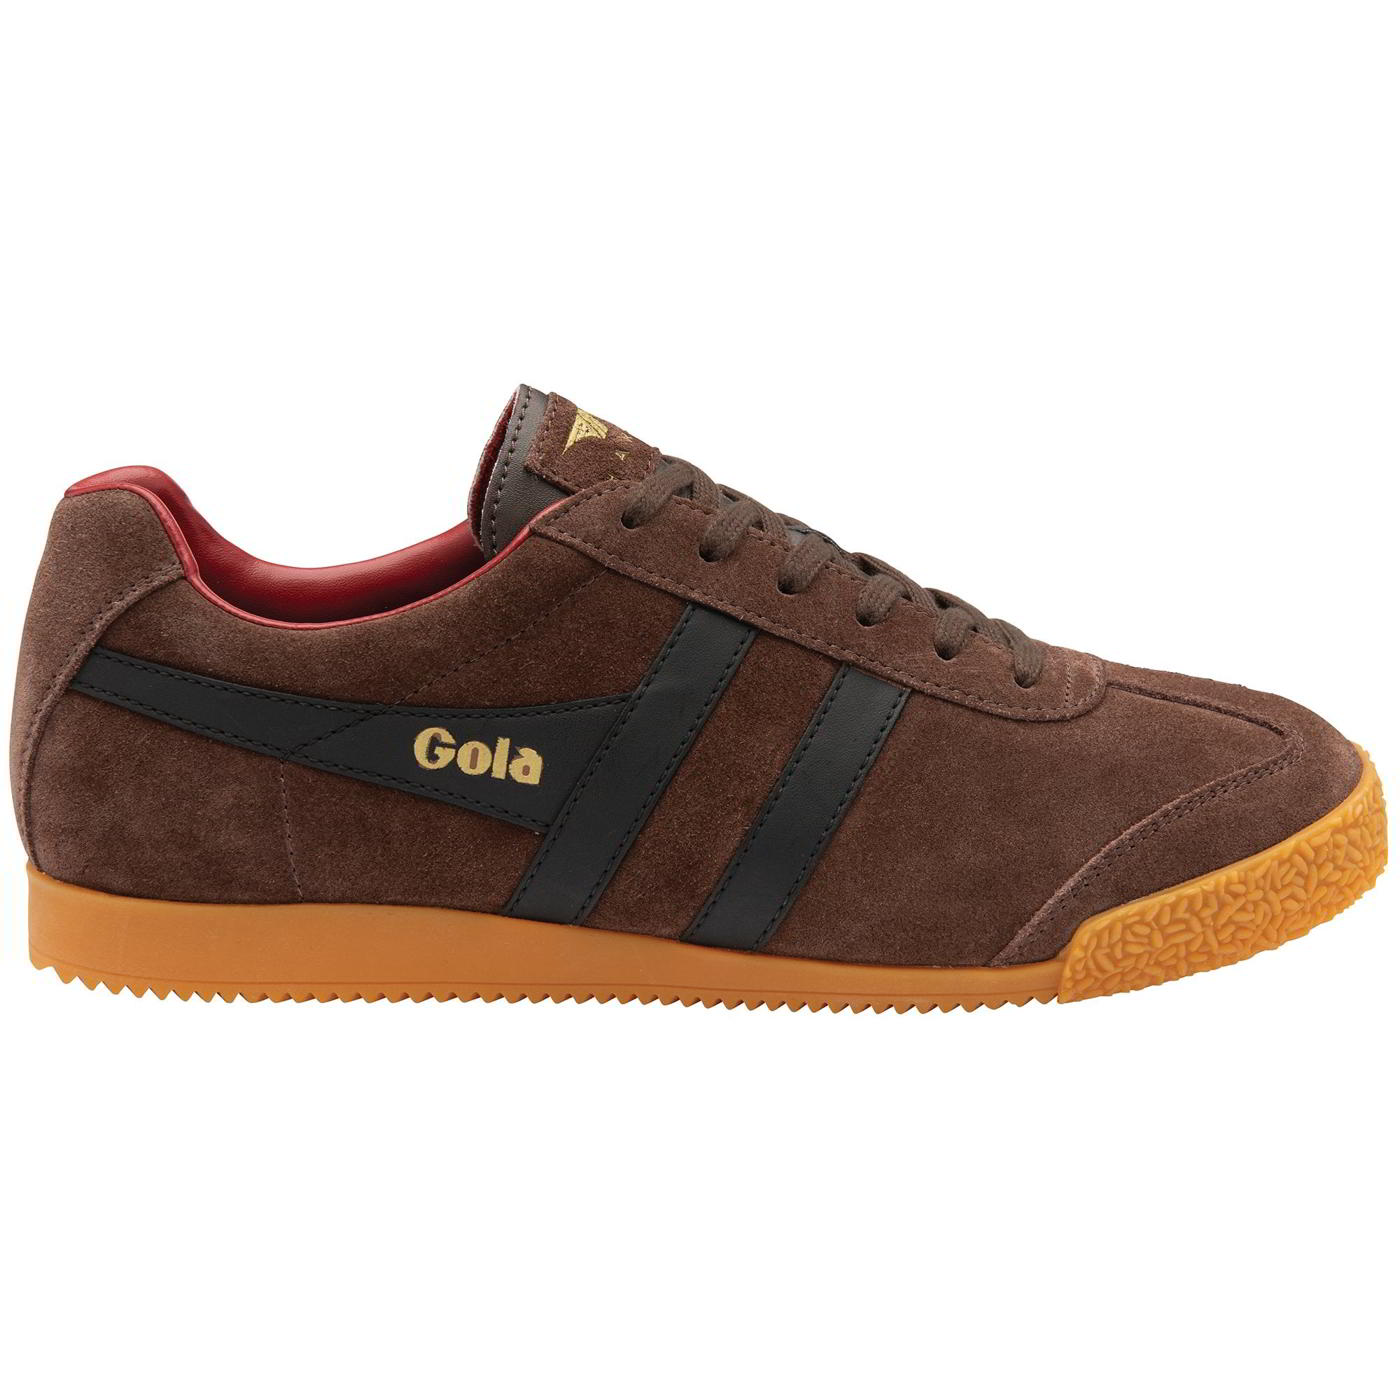 Gola Mens Harrier Suede Trainers Shoes - UK 11 Brown 2951